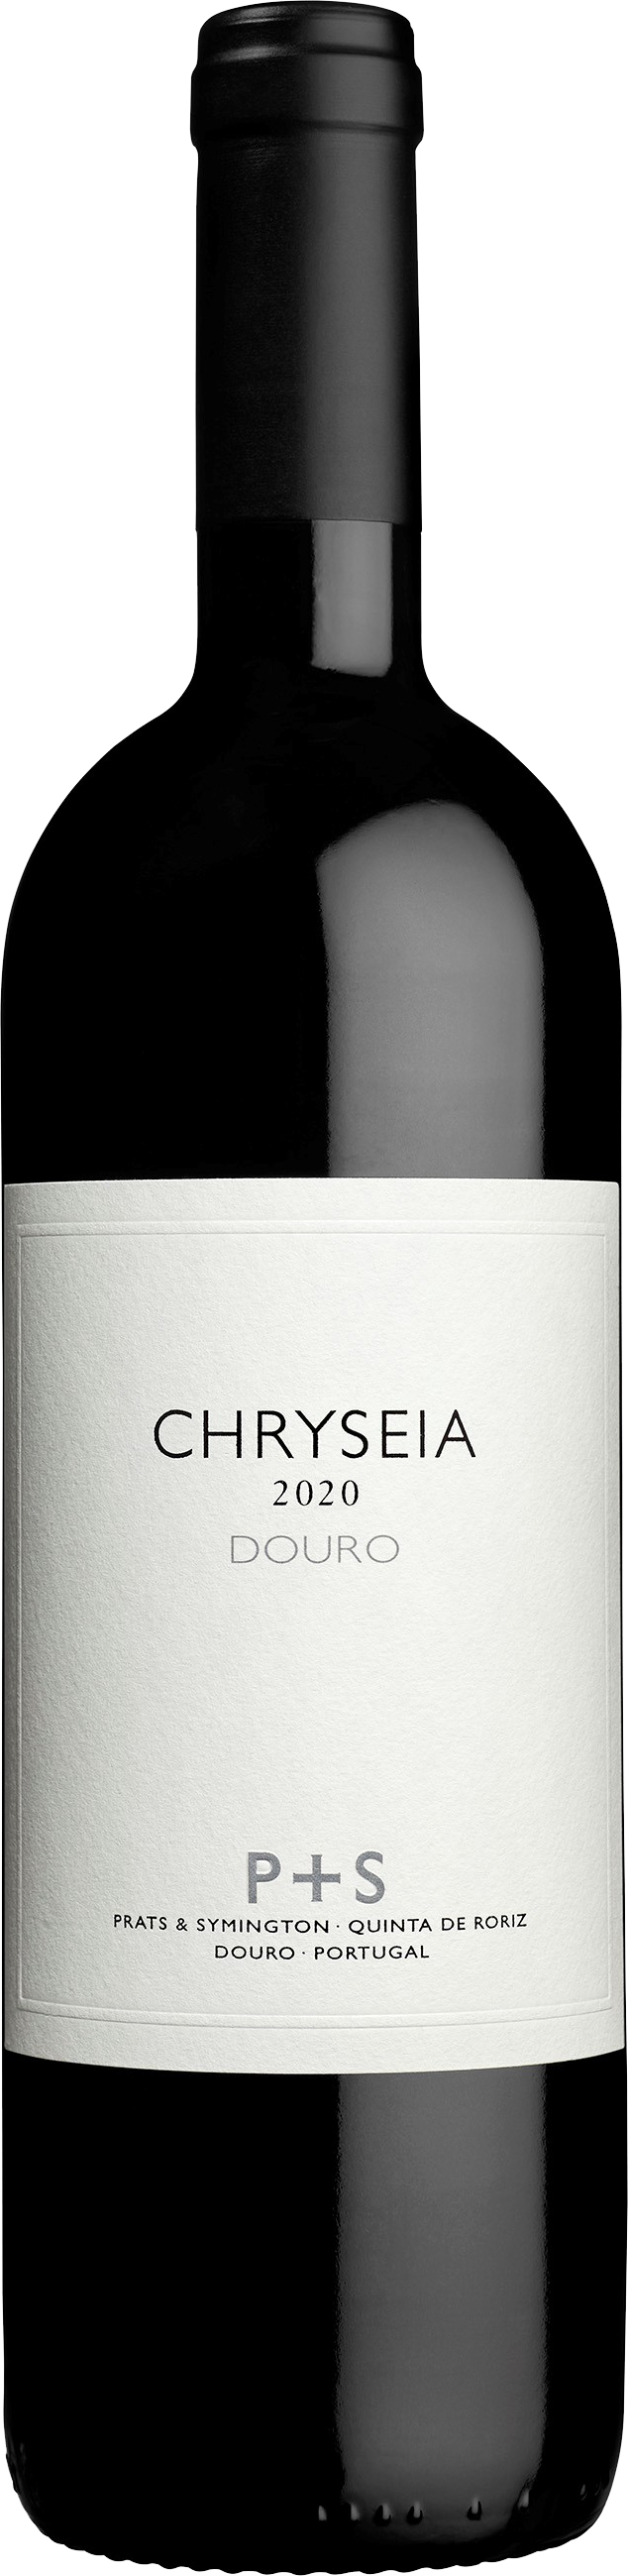 Product Image for P&S CHRYSEIA DOURO RED 2020